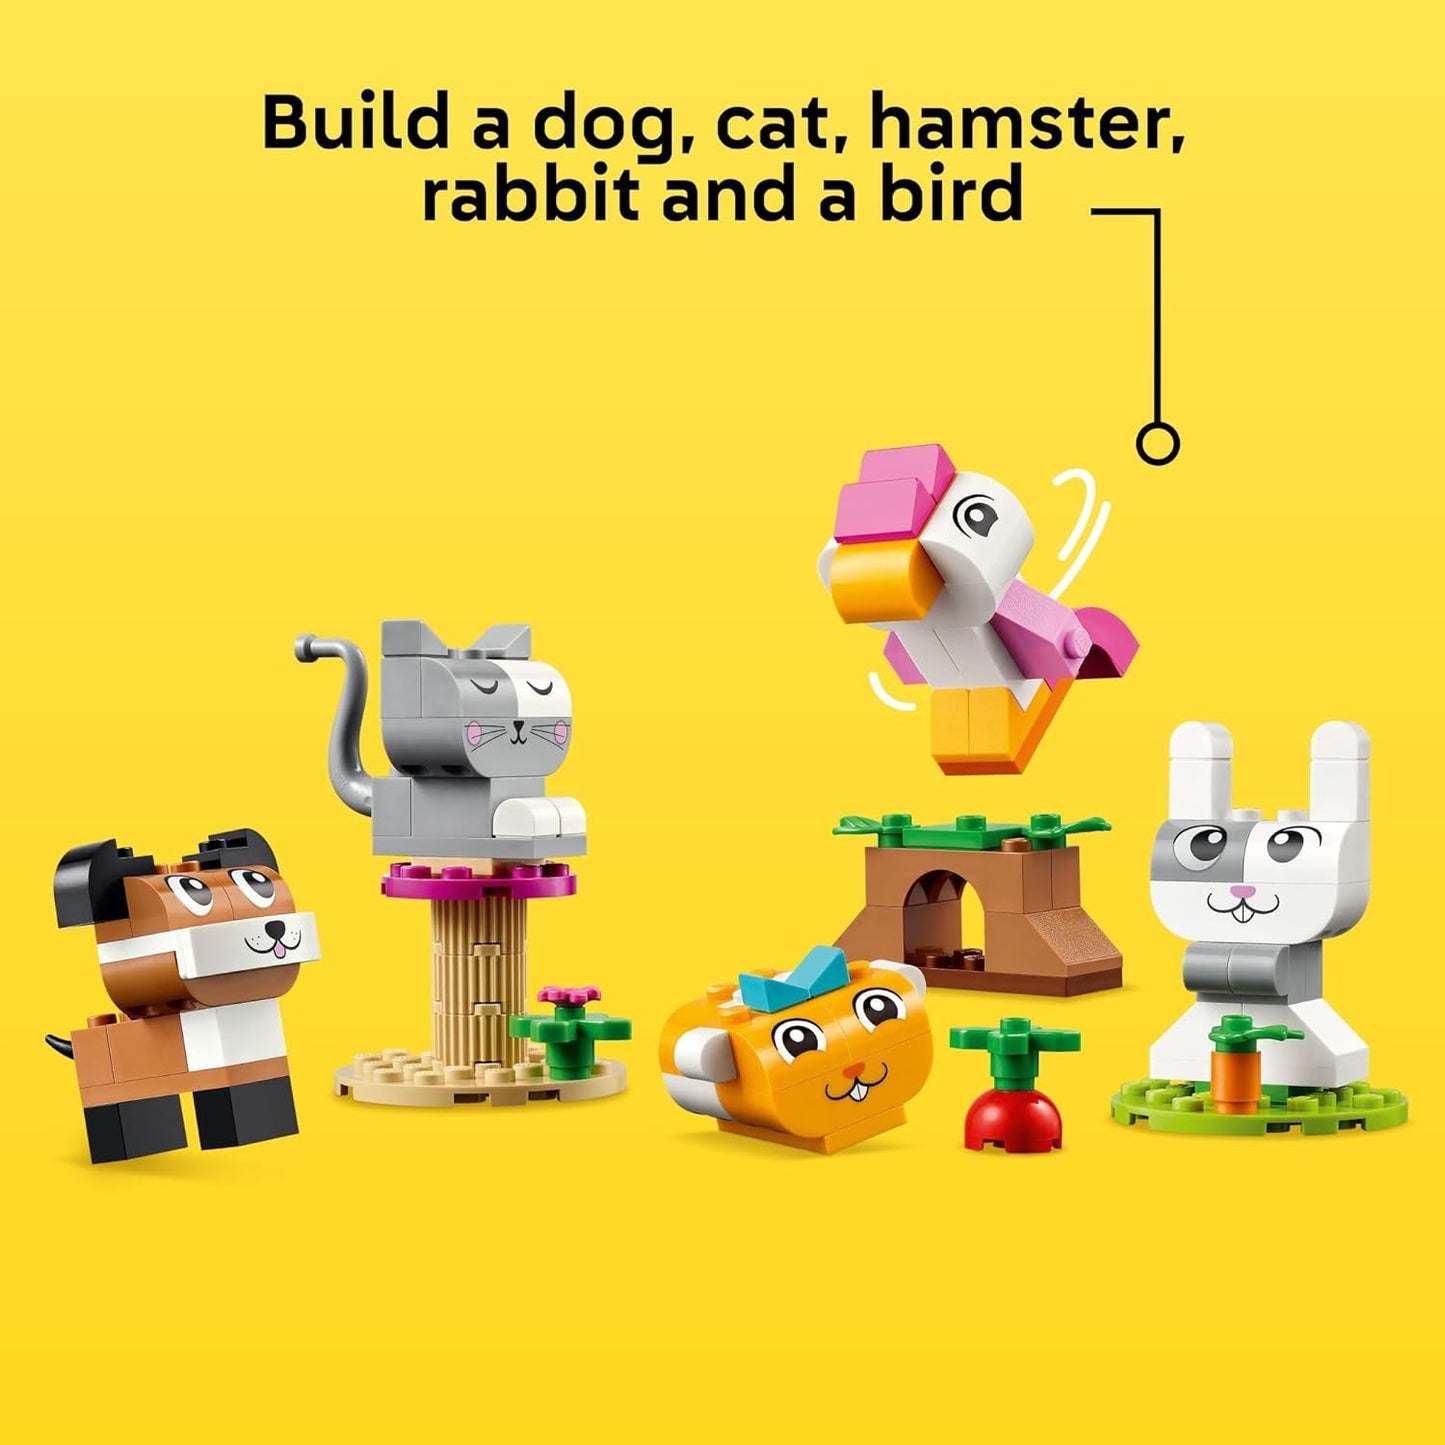 LEGO Classic Creative Pets, Building Brick Animals Toy, Kids Build a Dog, Cat, Rabbit, Hamster and Bird, Gift for Animal-Loving Boys and Girls Aged 5 and Up, Great Build Together Toy, 11034